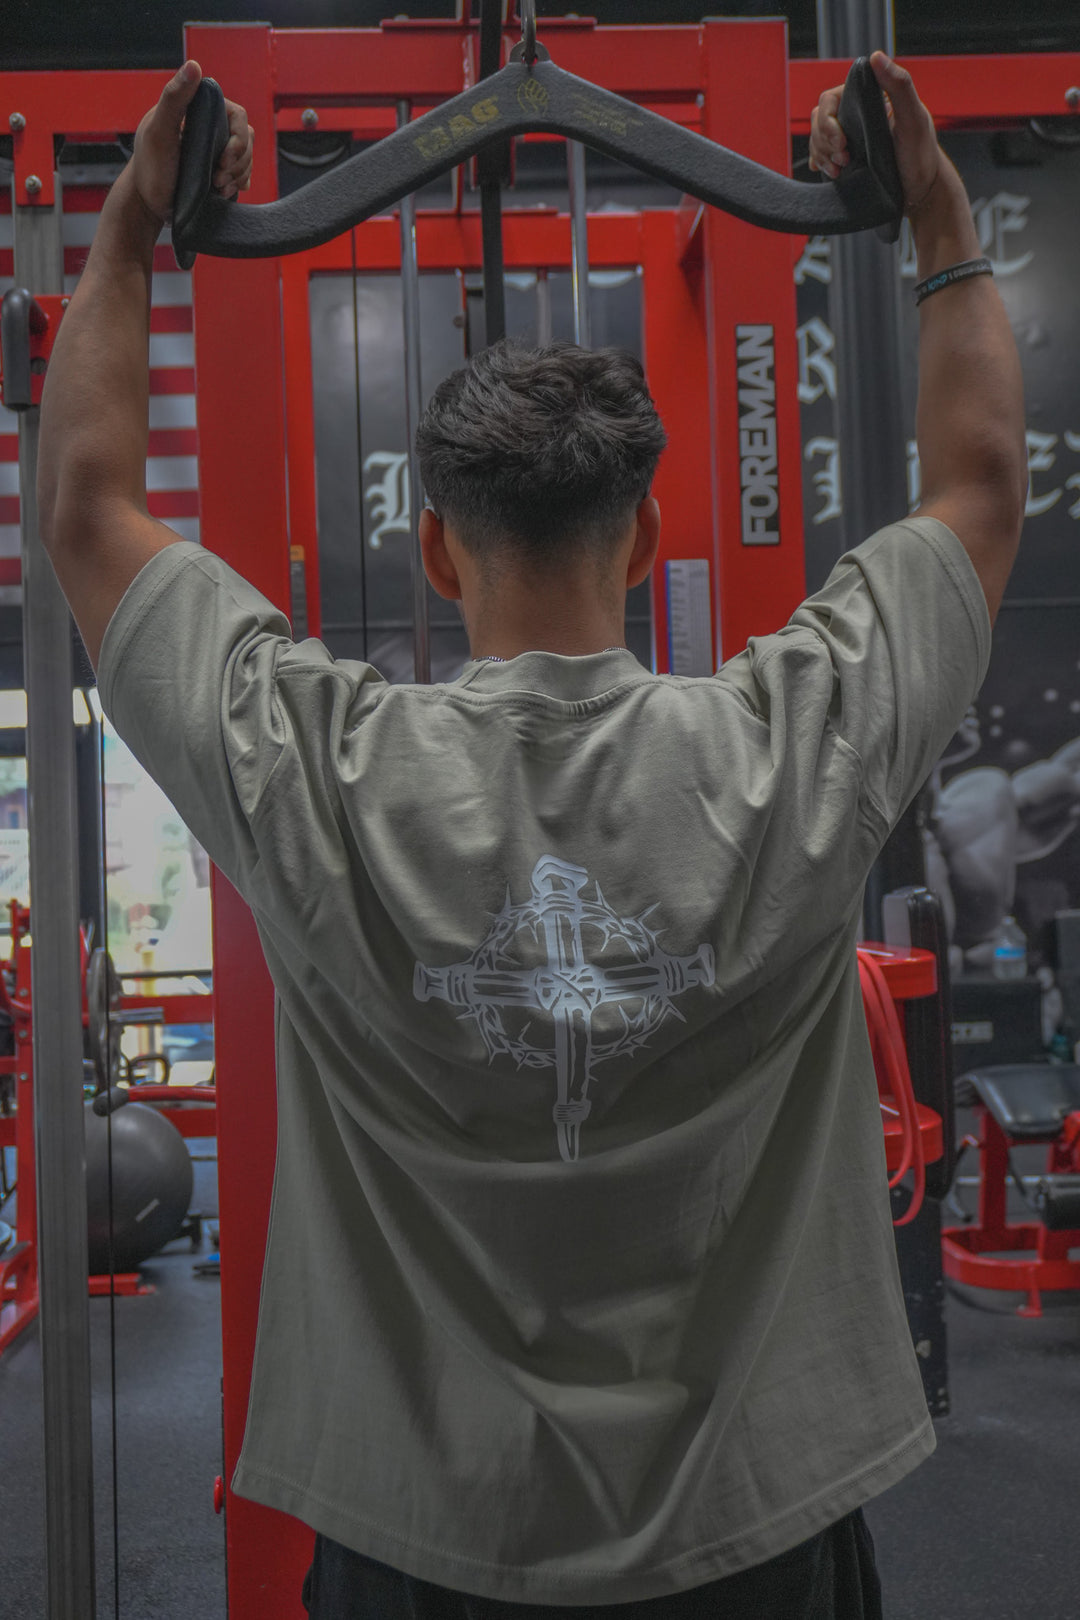 GET RIPPED LIFE® CROWN OF THORN CROSS TEE